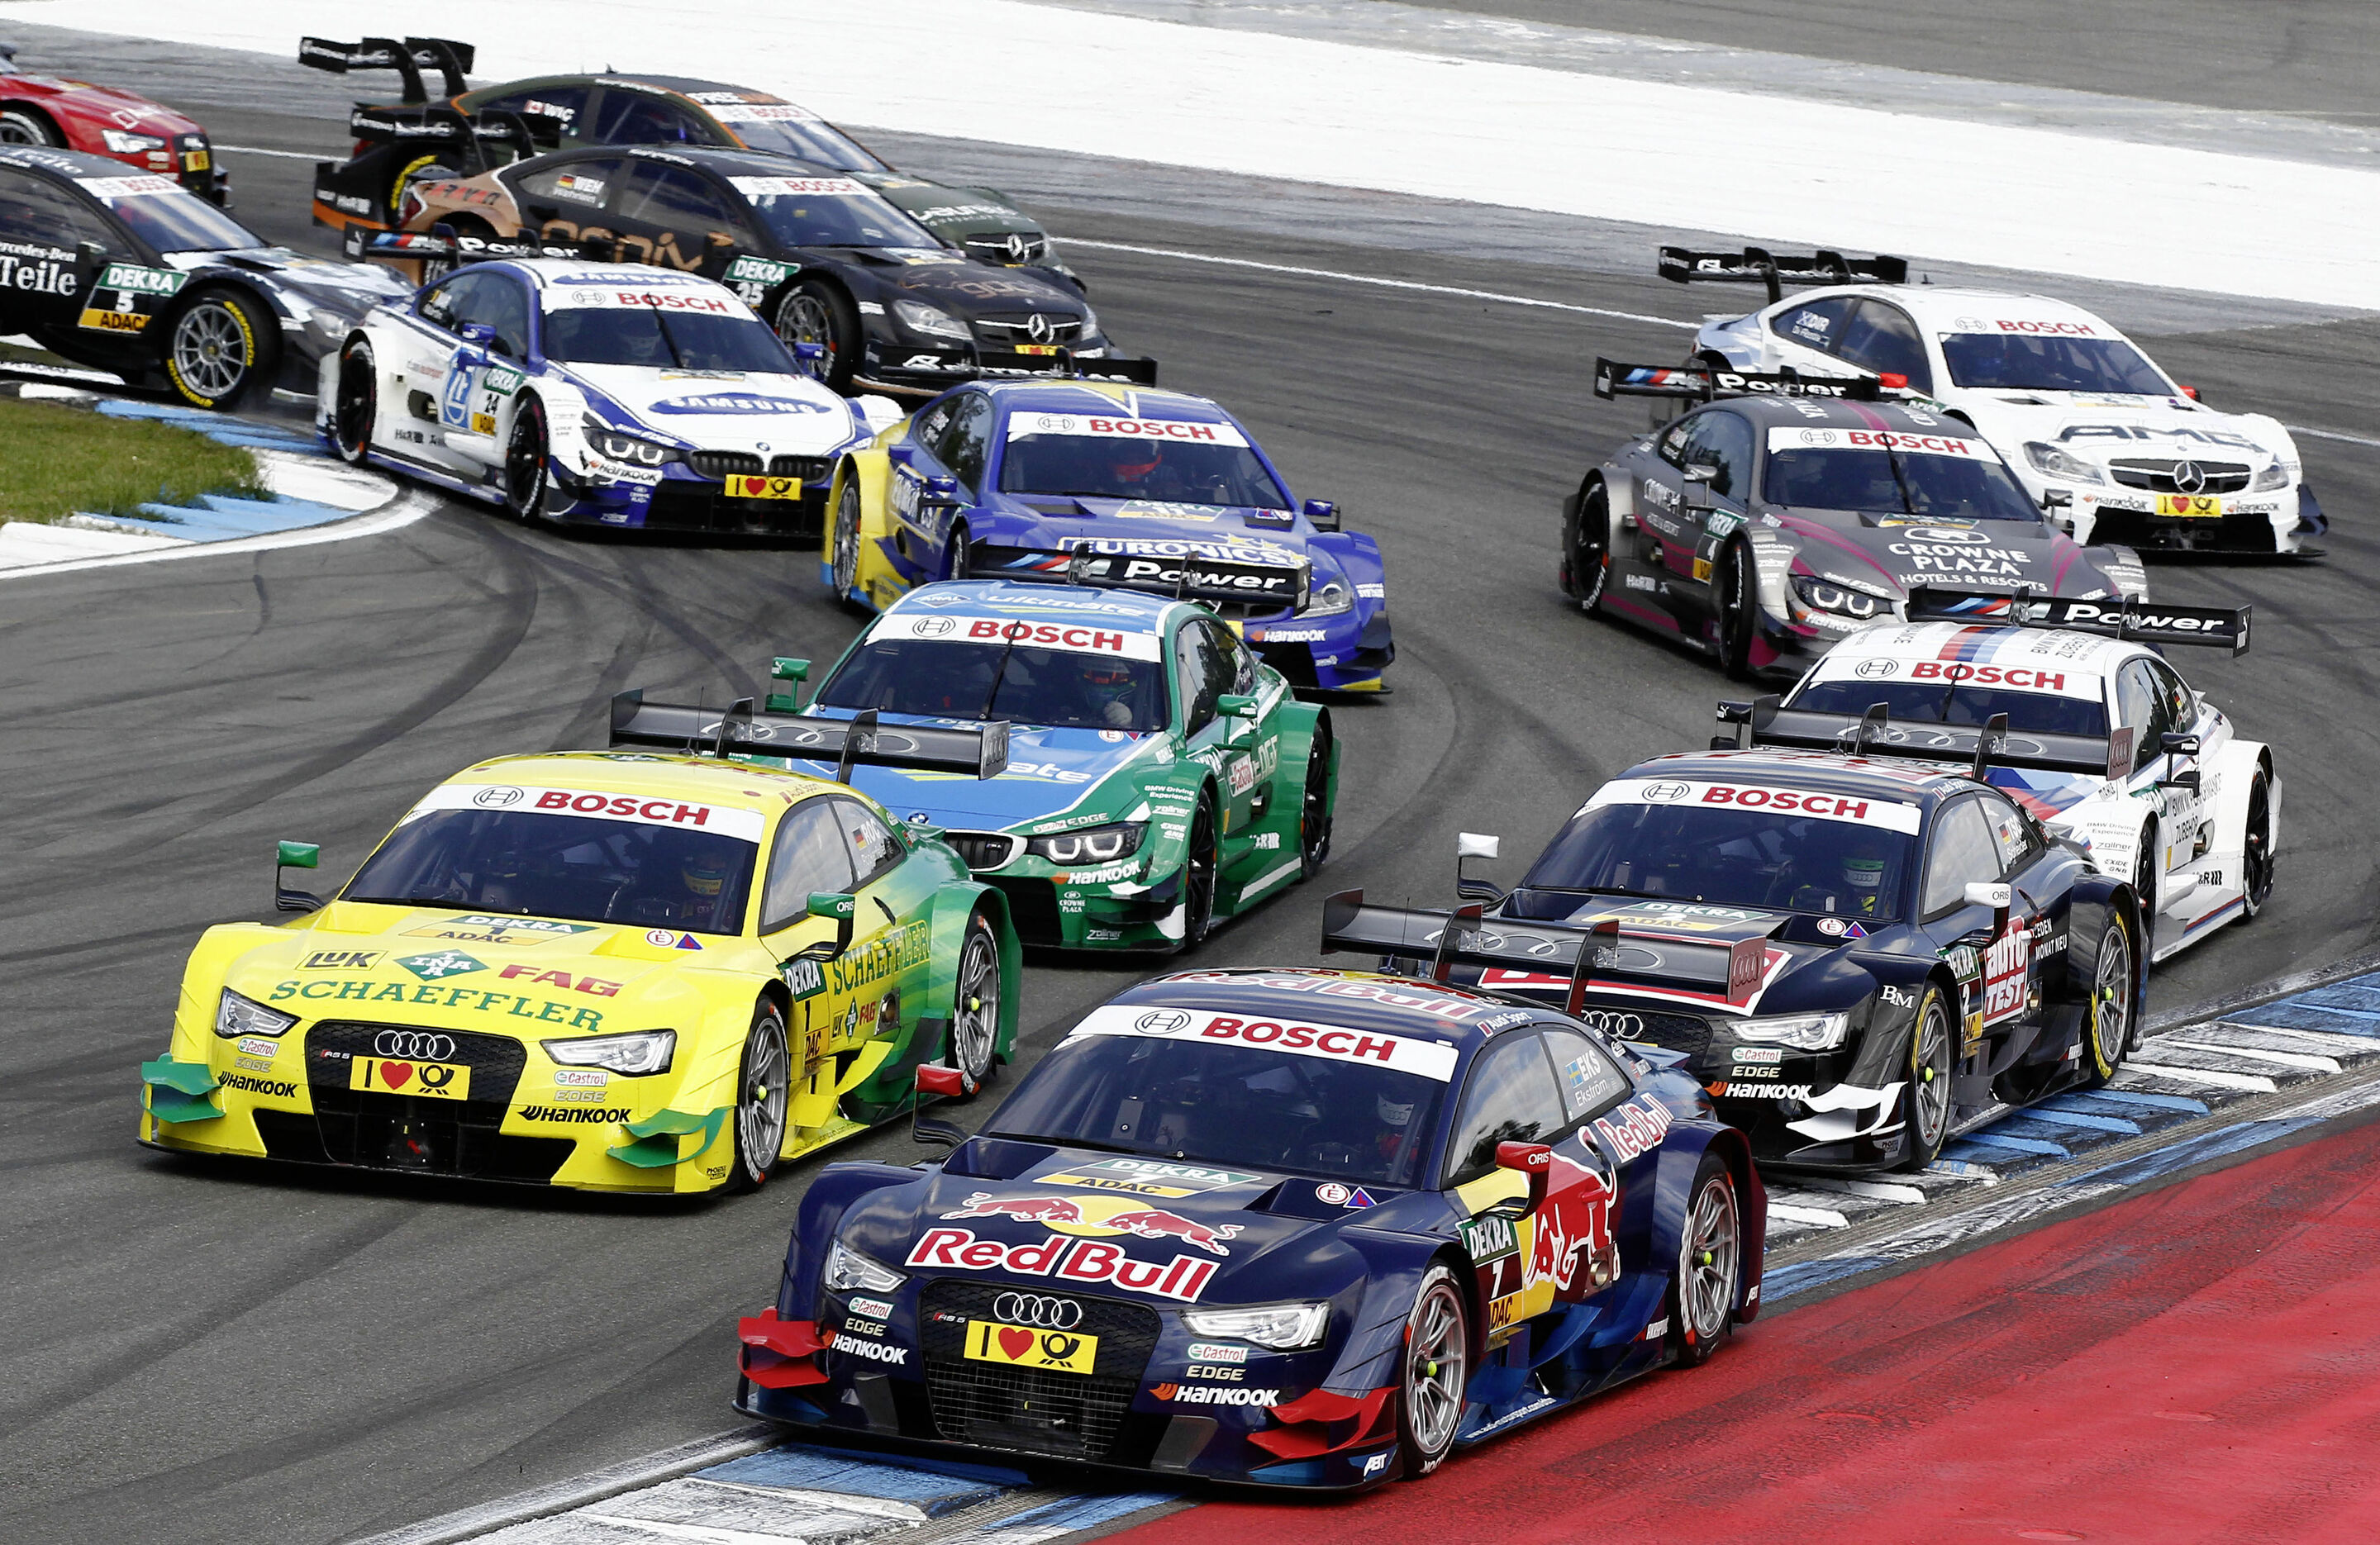 Audi travels to DTM at Oschersleben with tailwind